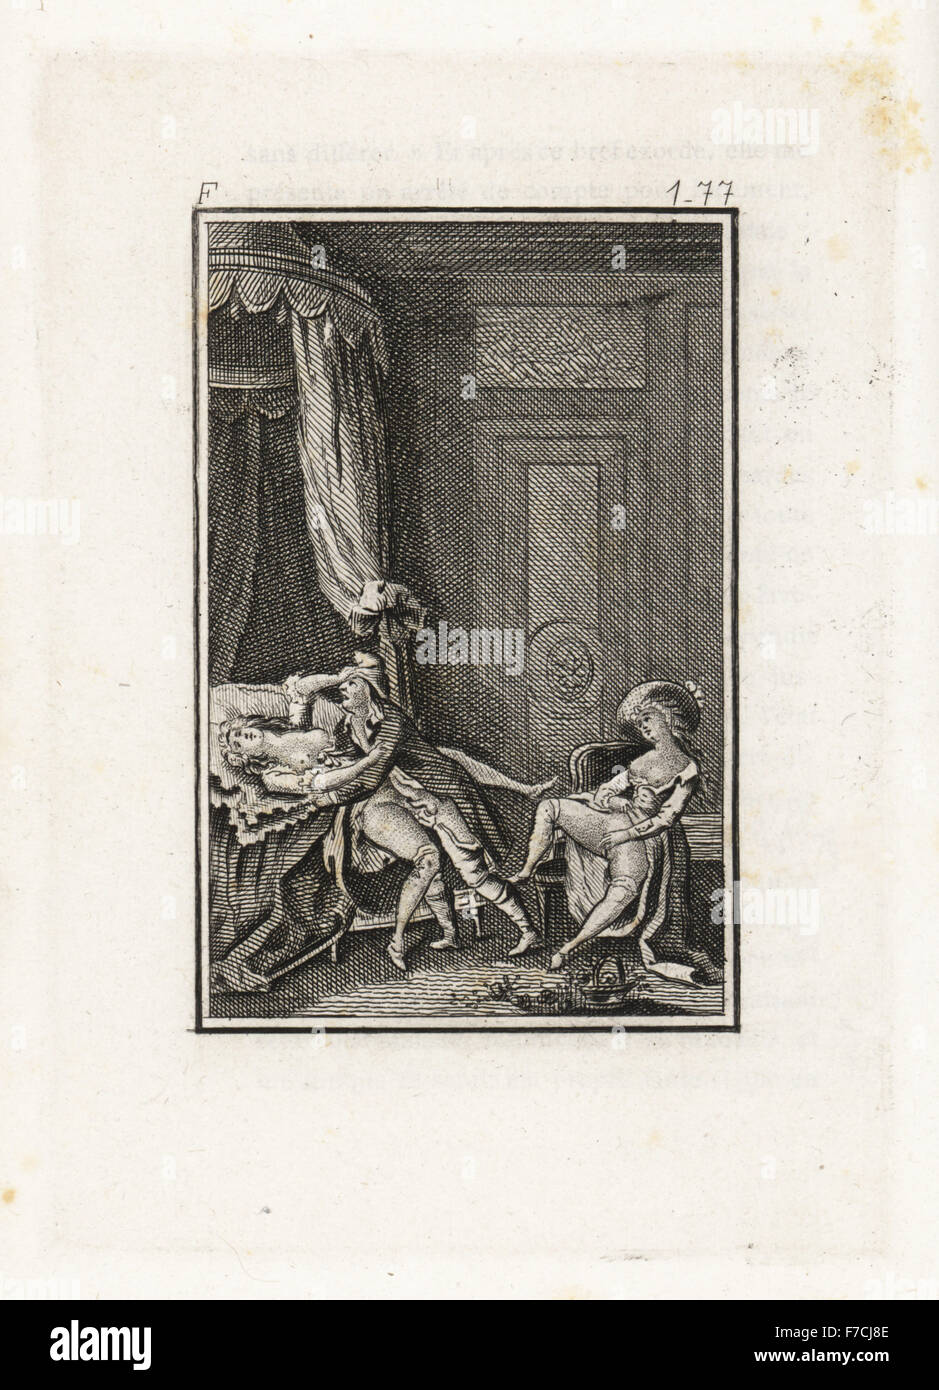 Erotic scene in a bedroom with gentleman having sex with a woman on a bed while another lady watches, 18th century photo